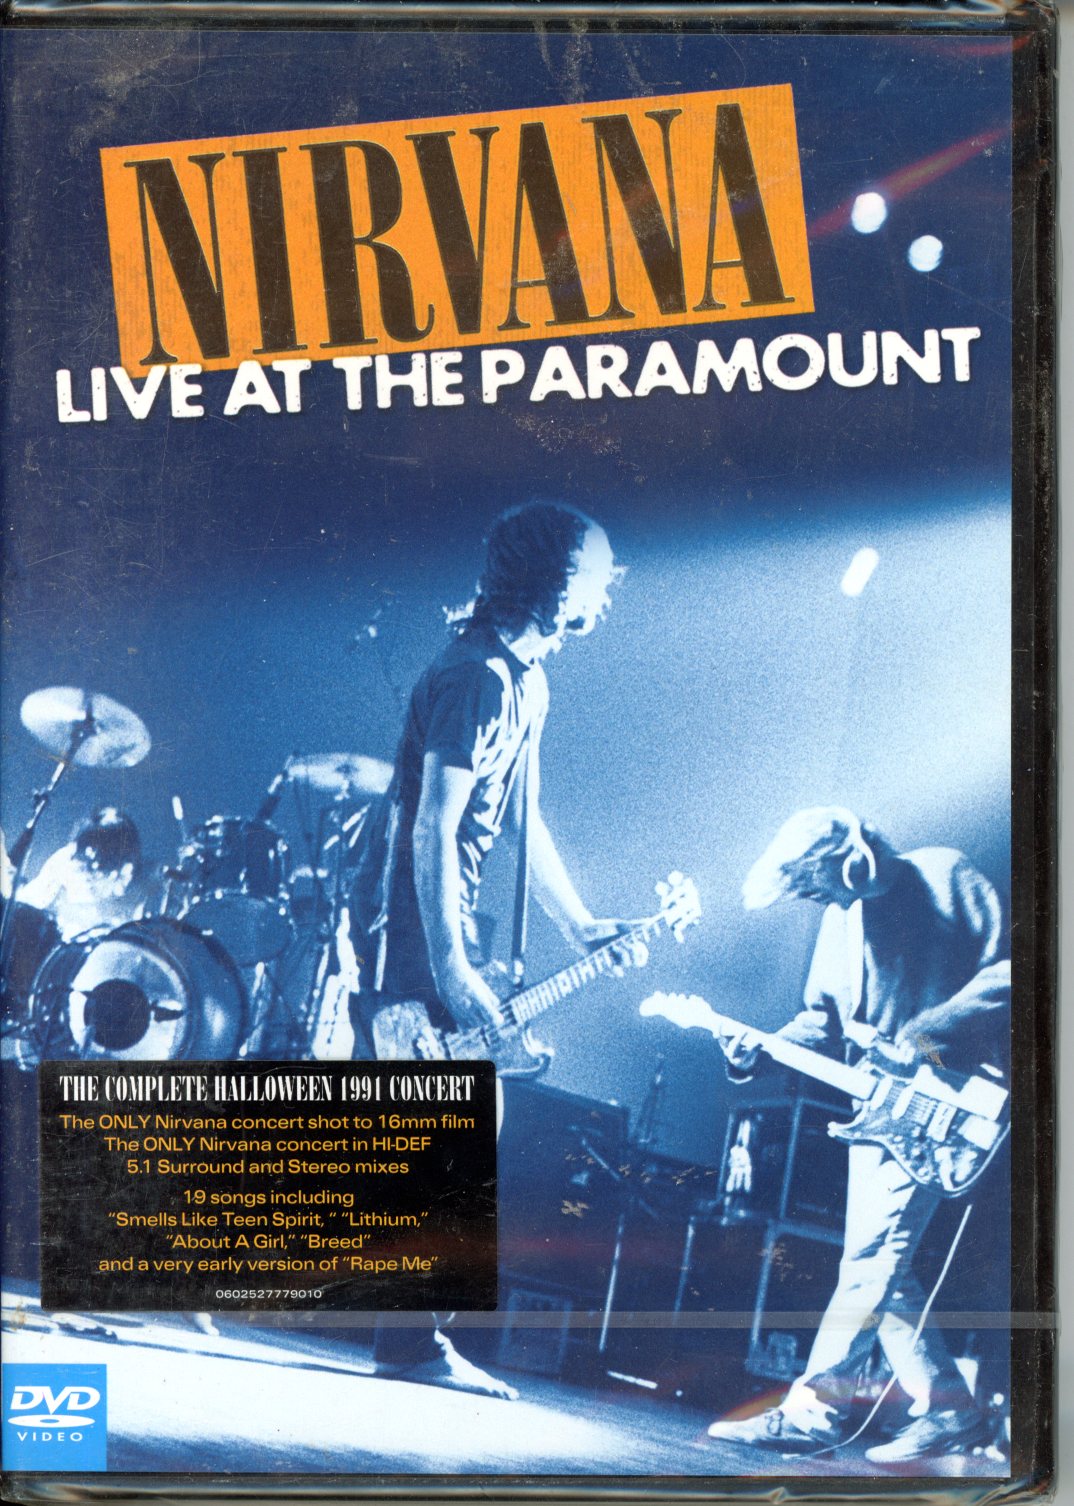 NIRVANA LIVE AT THE PARMOUNT - DVD NEUF - 602527779010